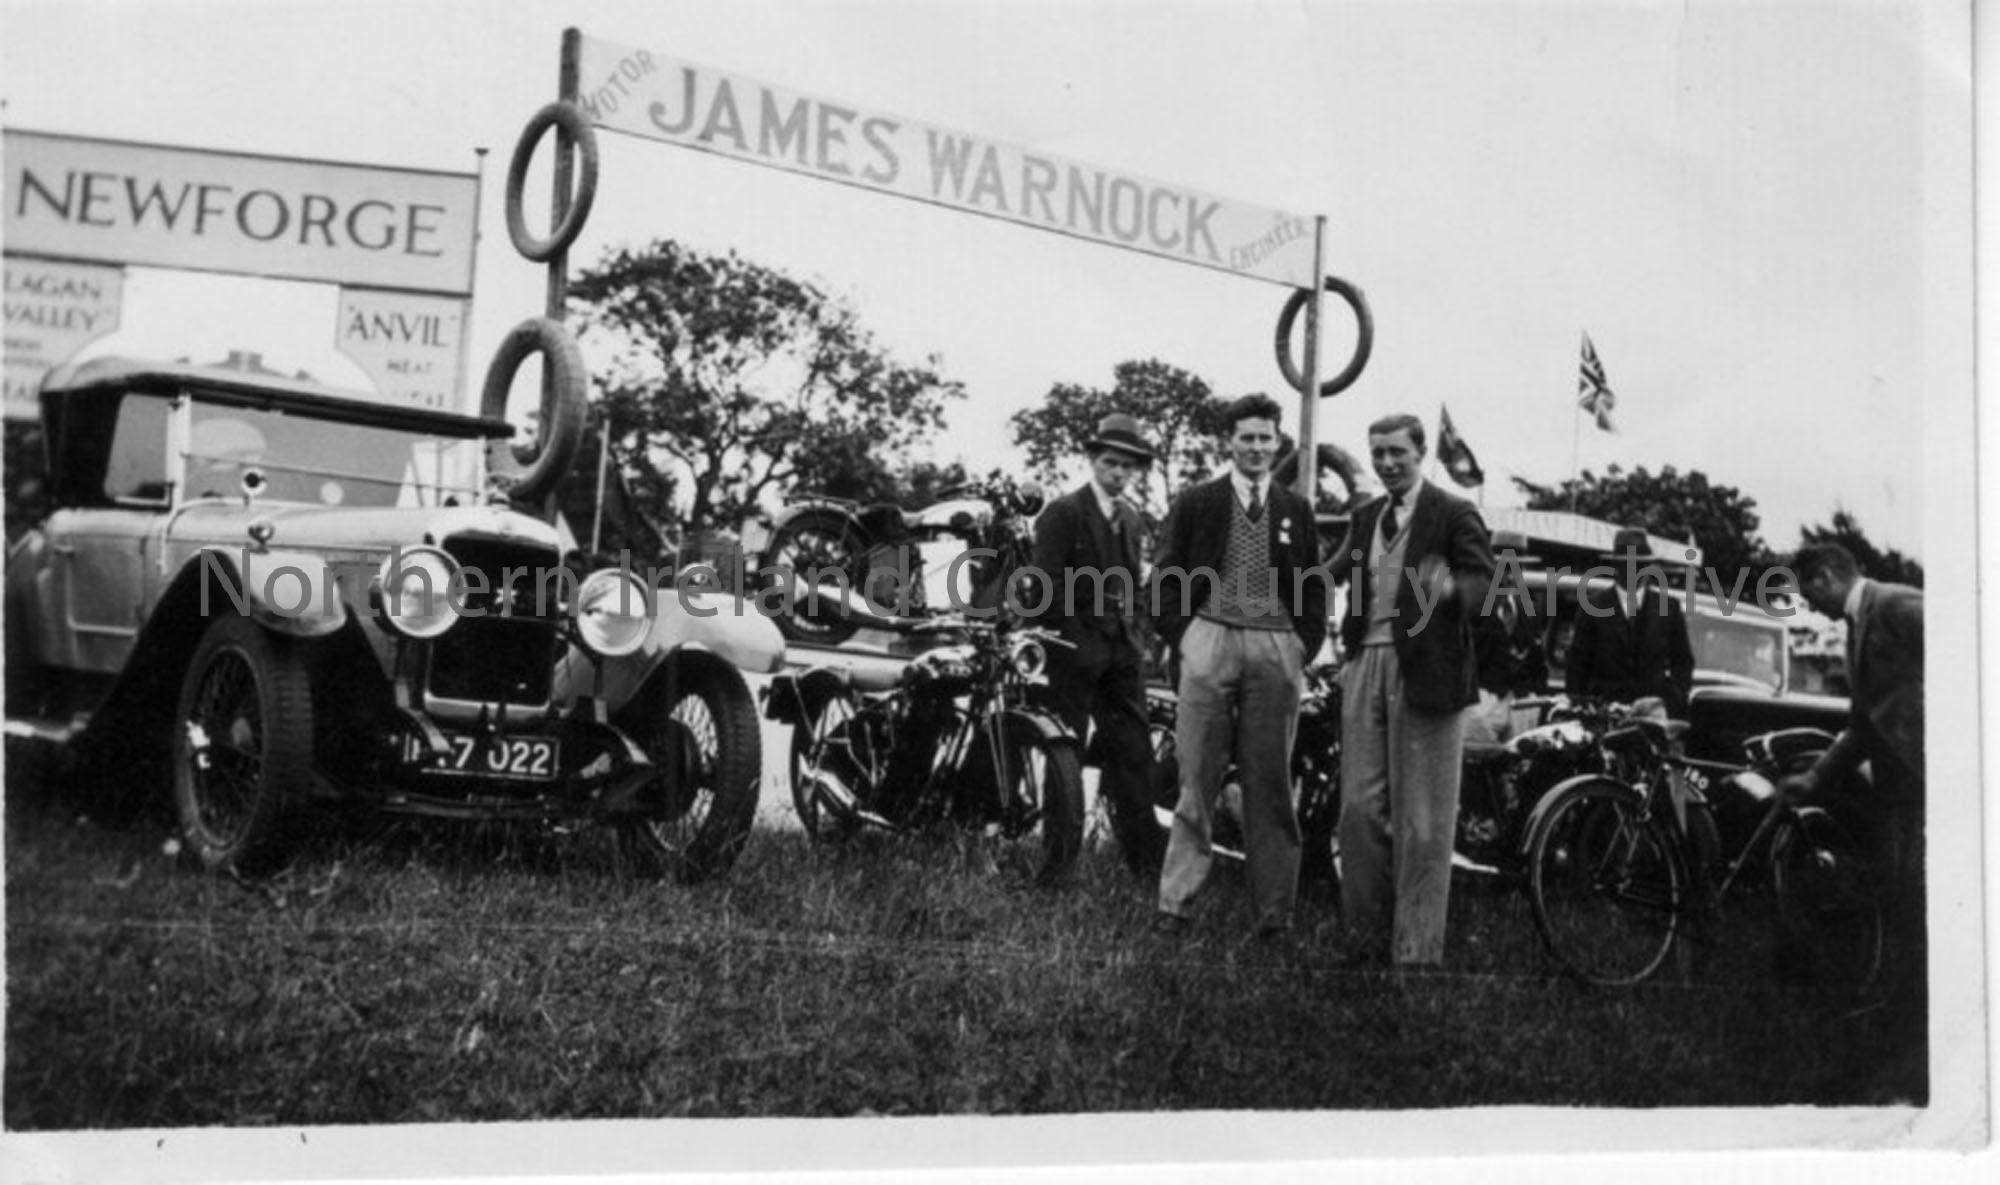 James Warnock’s Motor Vehicle stand. Donor’s father stands in centre with two other men